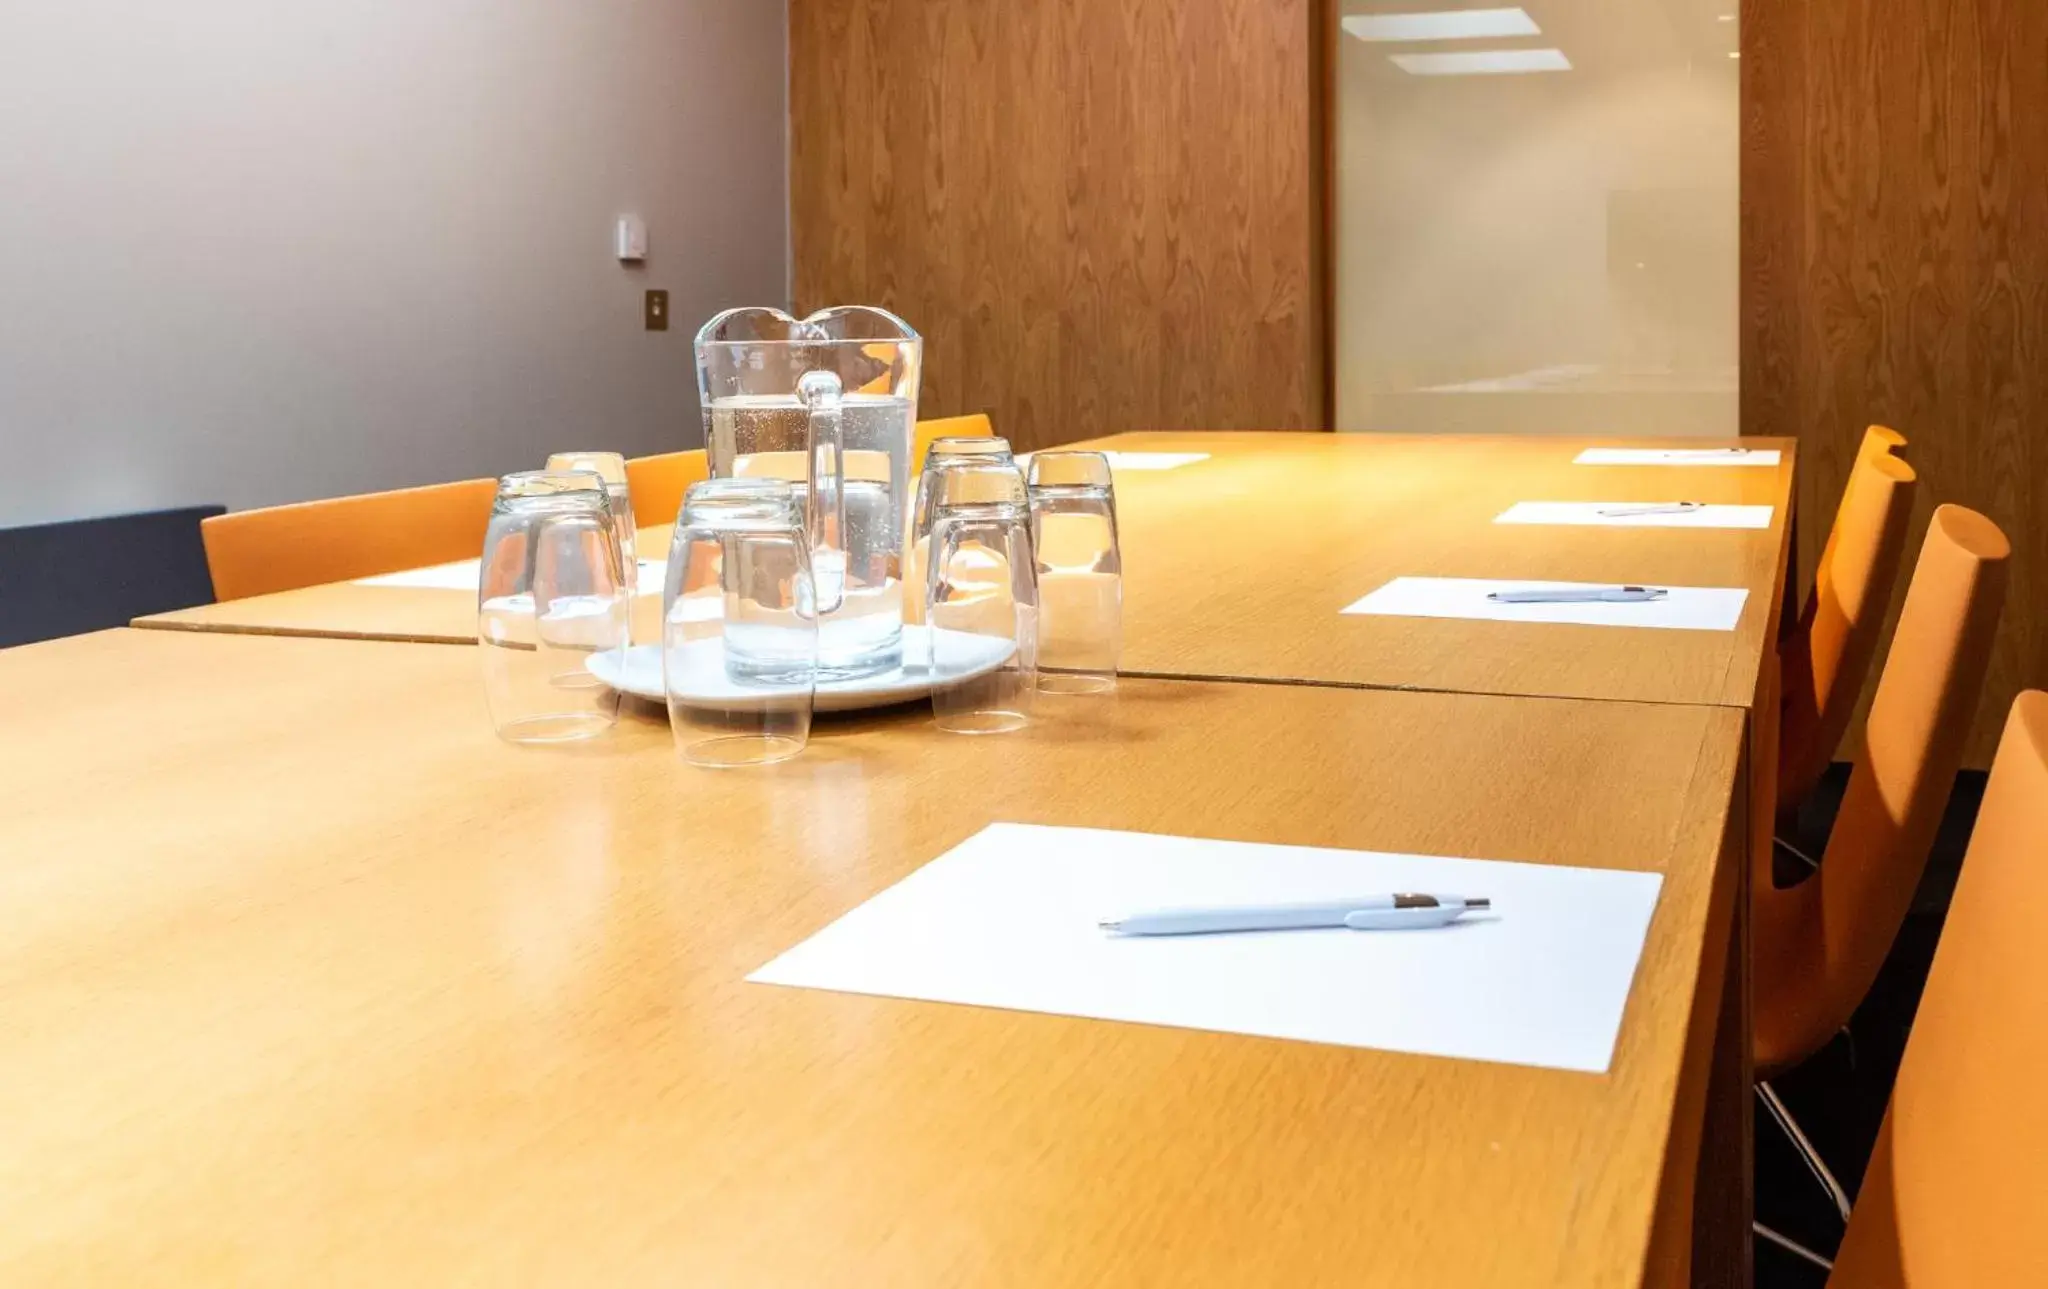 Meeting/conference room in The Lawrance Luxury Aparthotel - Harrogate